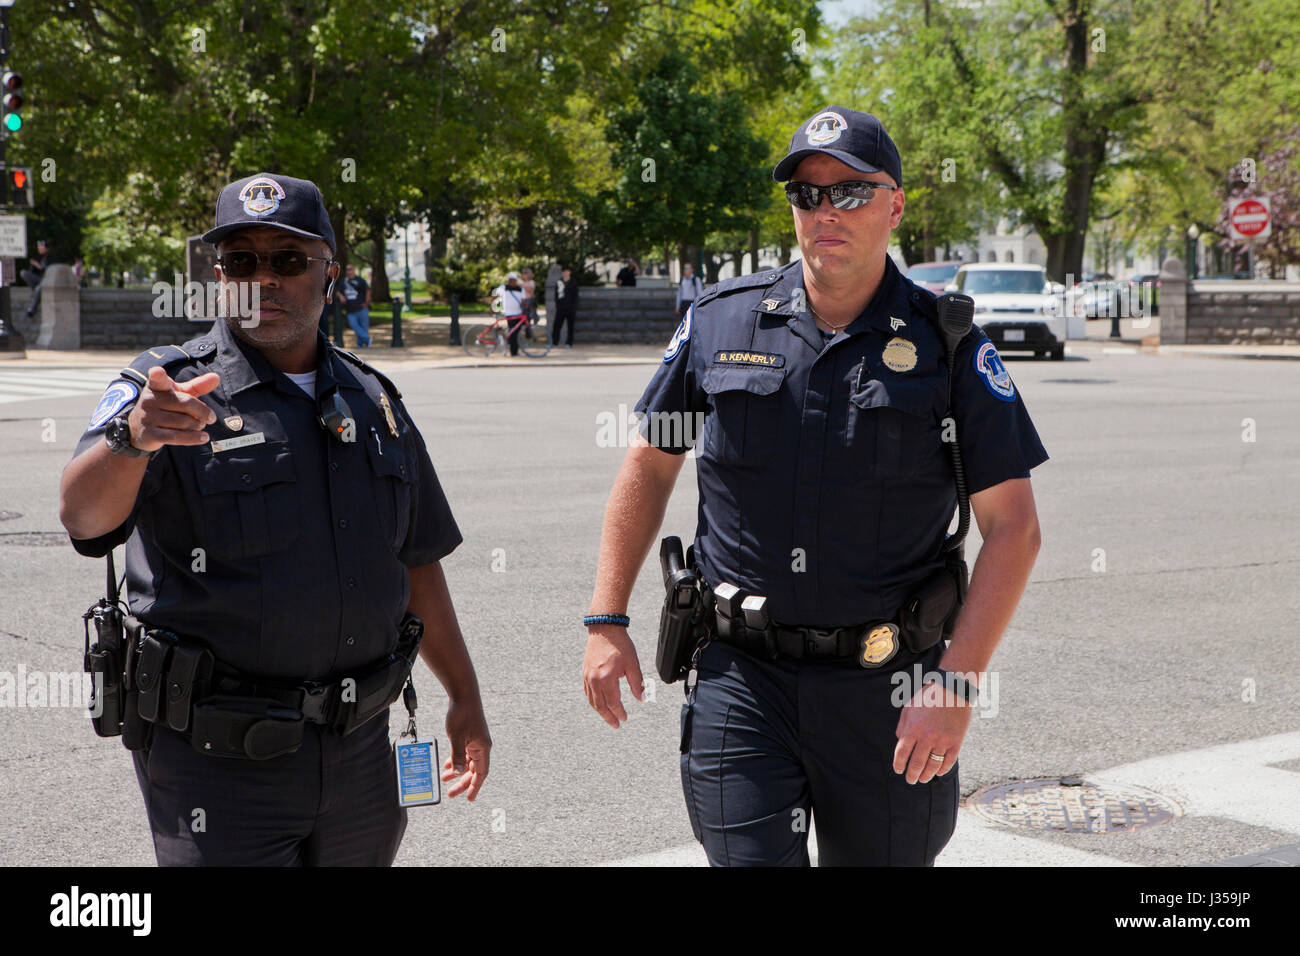 US Capitol Police officers discussing a case - Washington, DC USA Stock Photo